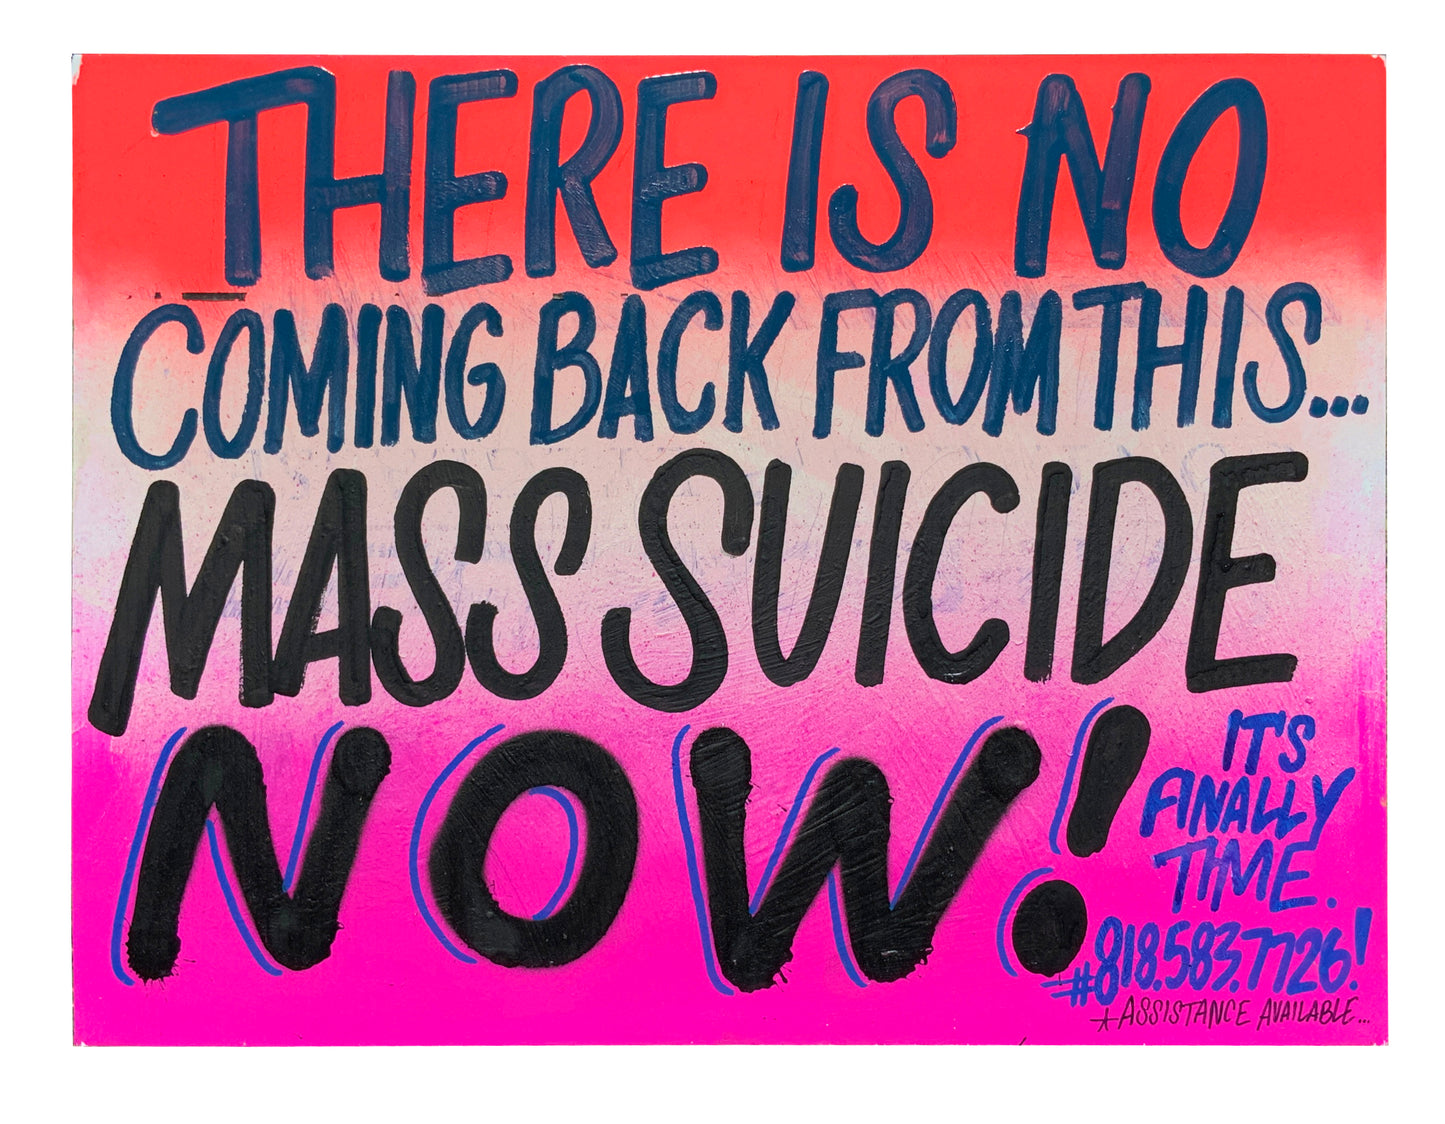 "MASS SUICIDE NOW" by Cash4 - Hand Painted Sign - 2020